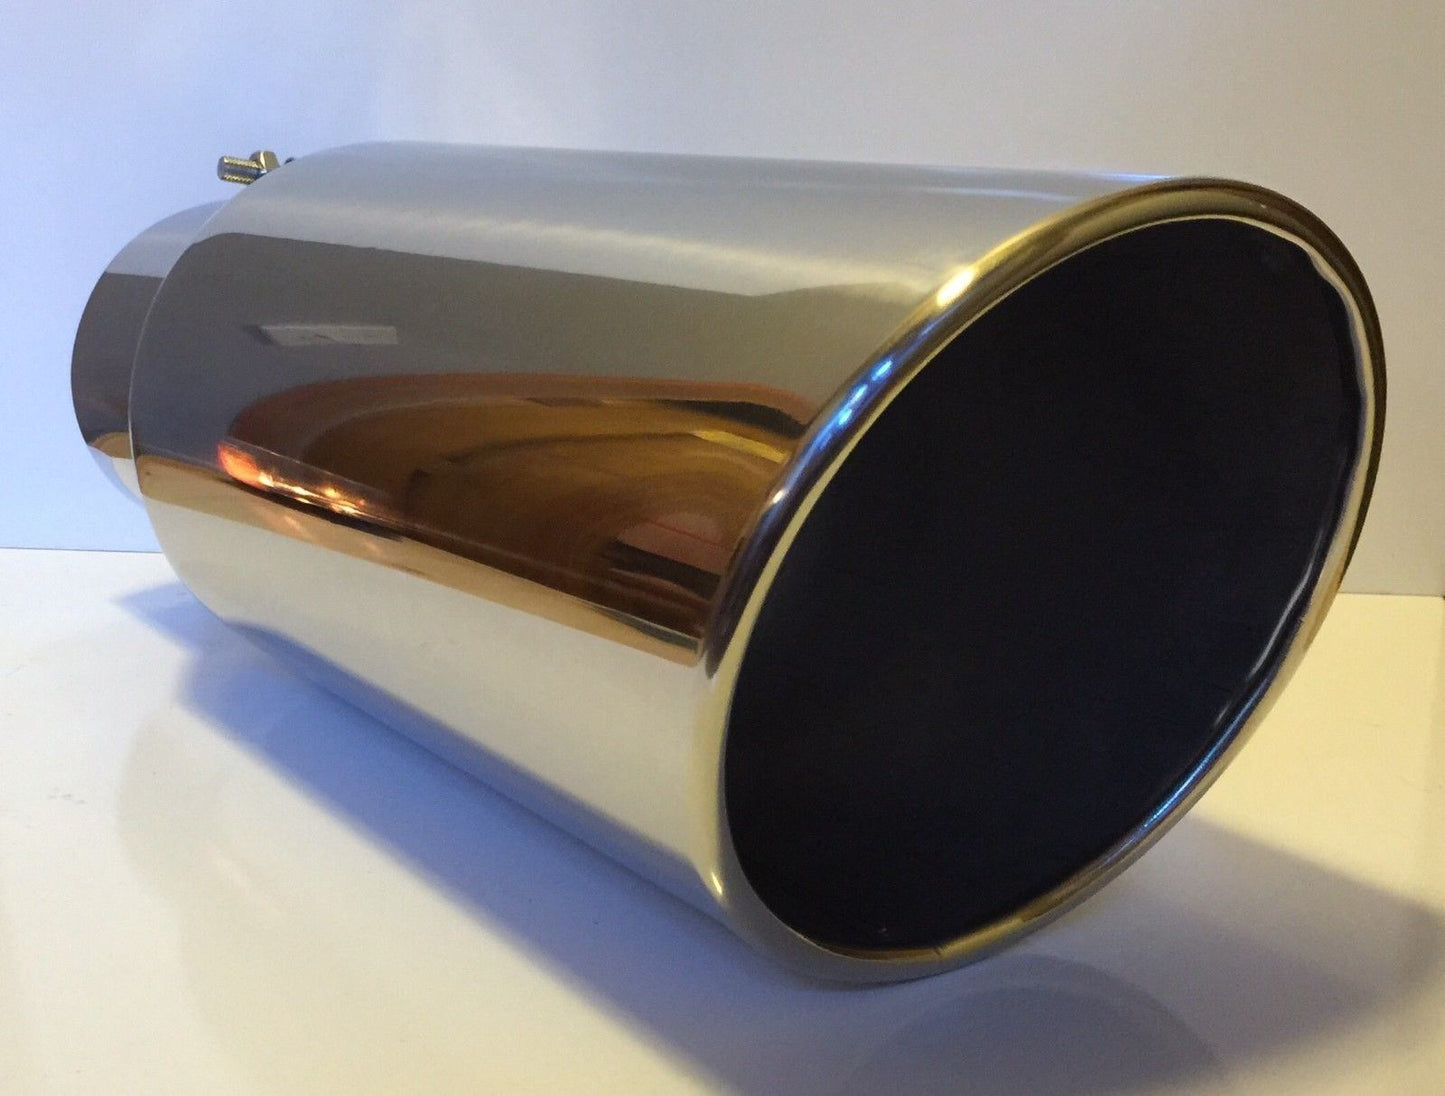 CHEVY DURAMAX 6.6L 4" IN x 7" OUT x 18" LONG POLISHED STAINLESS EXHAUST TIP